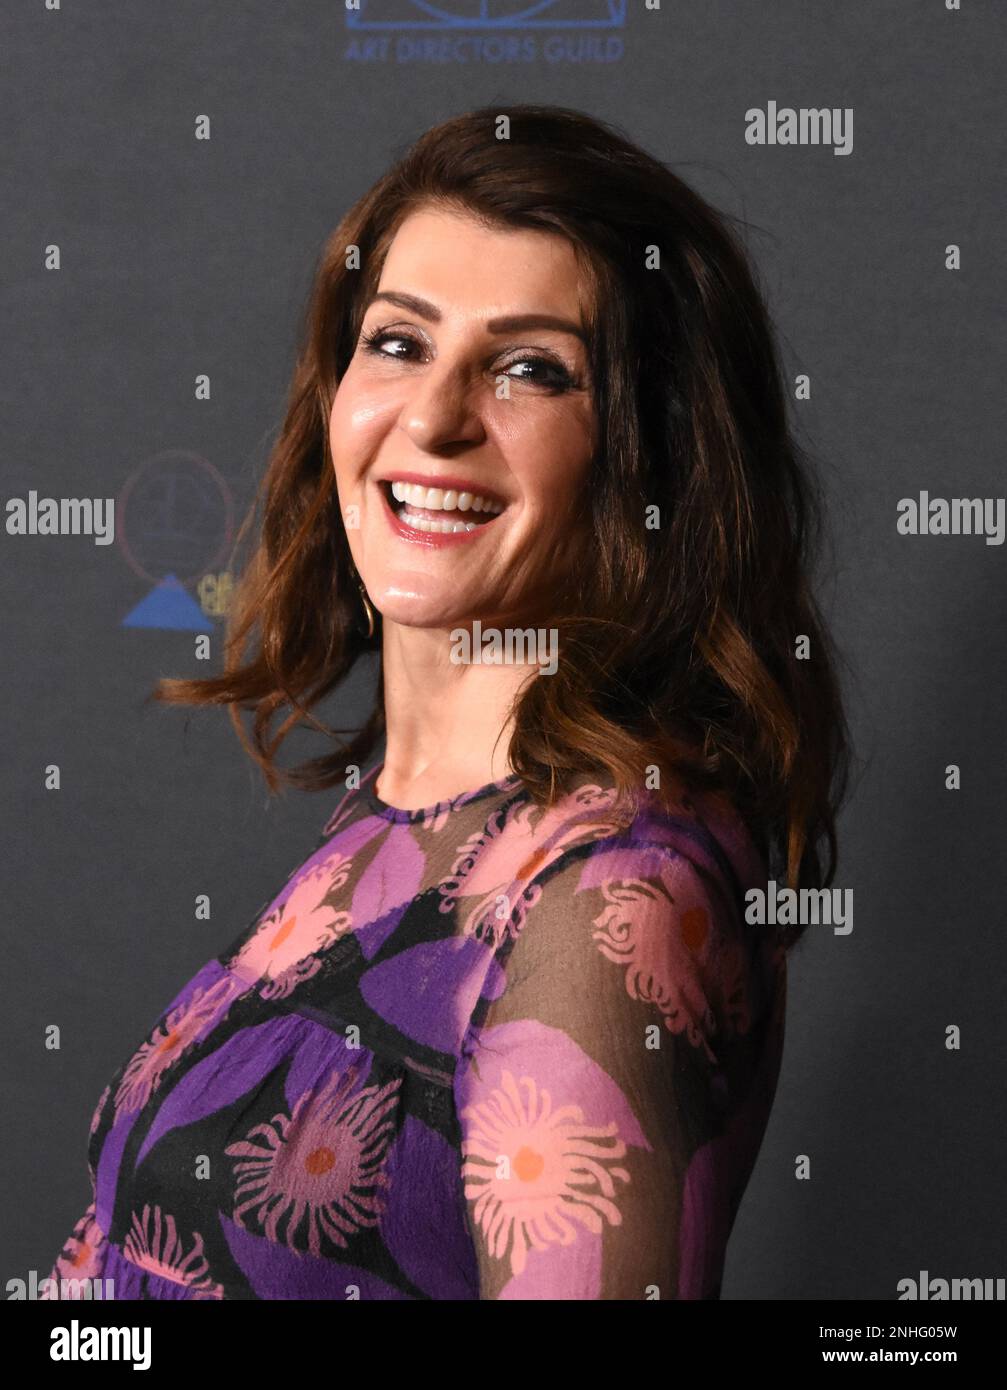 Los Angeles, California, USA 18th February 2023 Actress Nia Vardalos  attends the 27th Annual Art Directors Guild Awards at InterContinental Los  Angeles Downtown on February 18, 2023 in Los Angeles, California, USA.